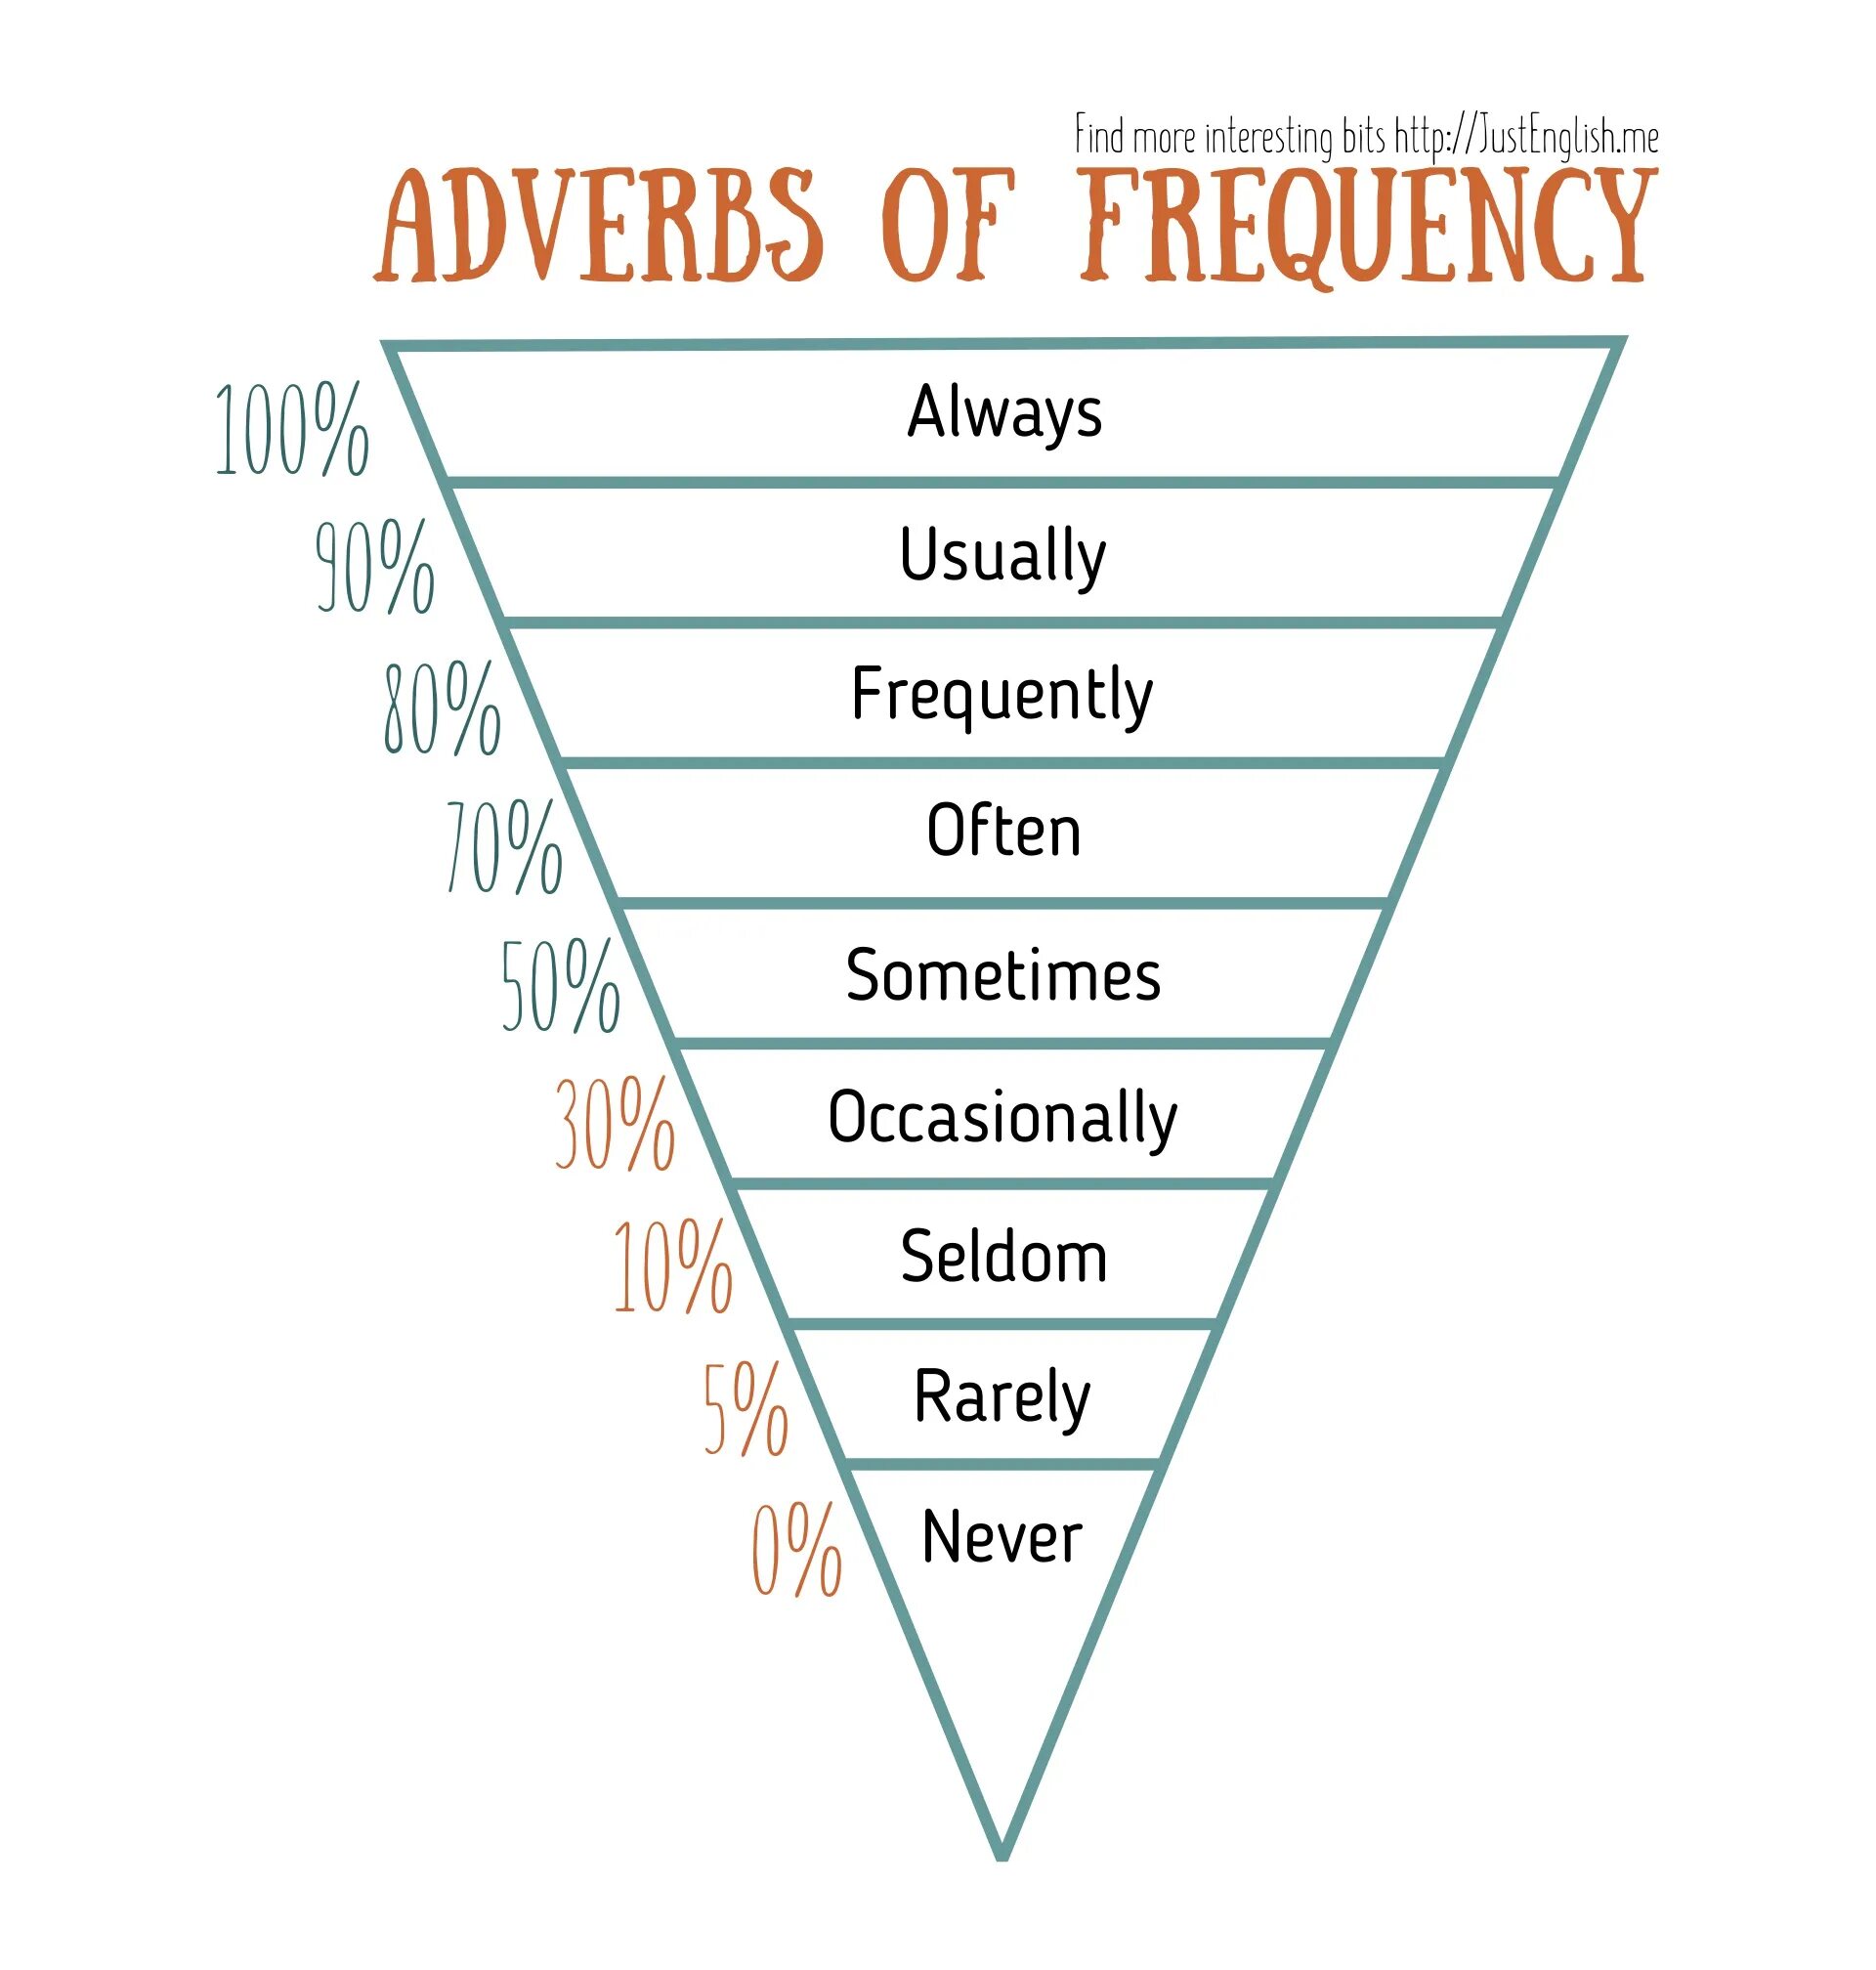 Always your type. Adverbs of Frequency. Adverbs of Frequency схема. Наречия частотности в английском. Seldom rarely.